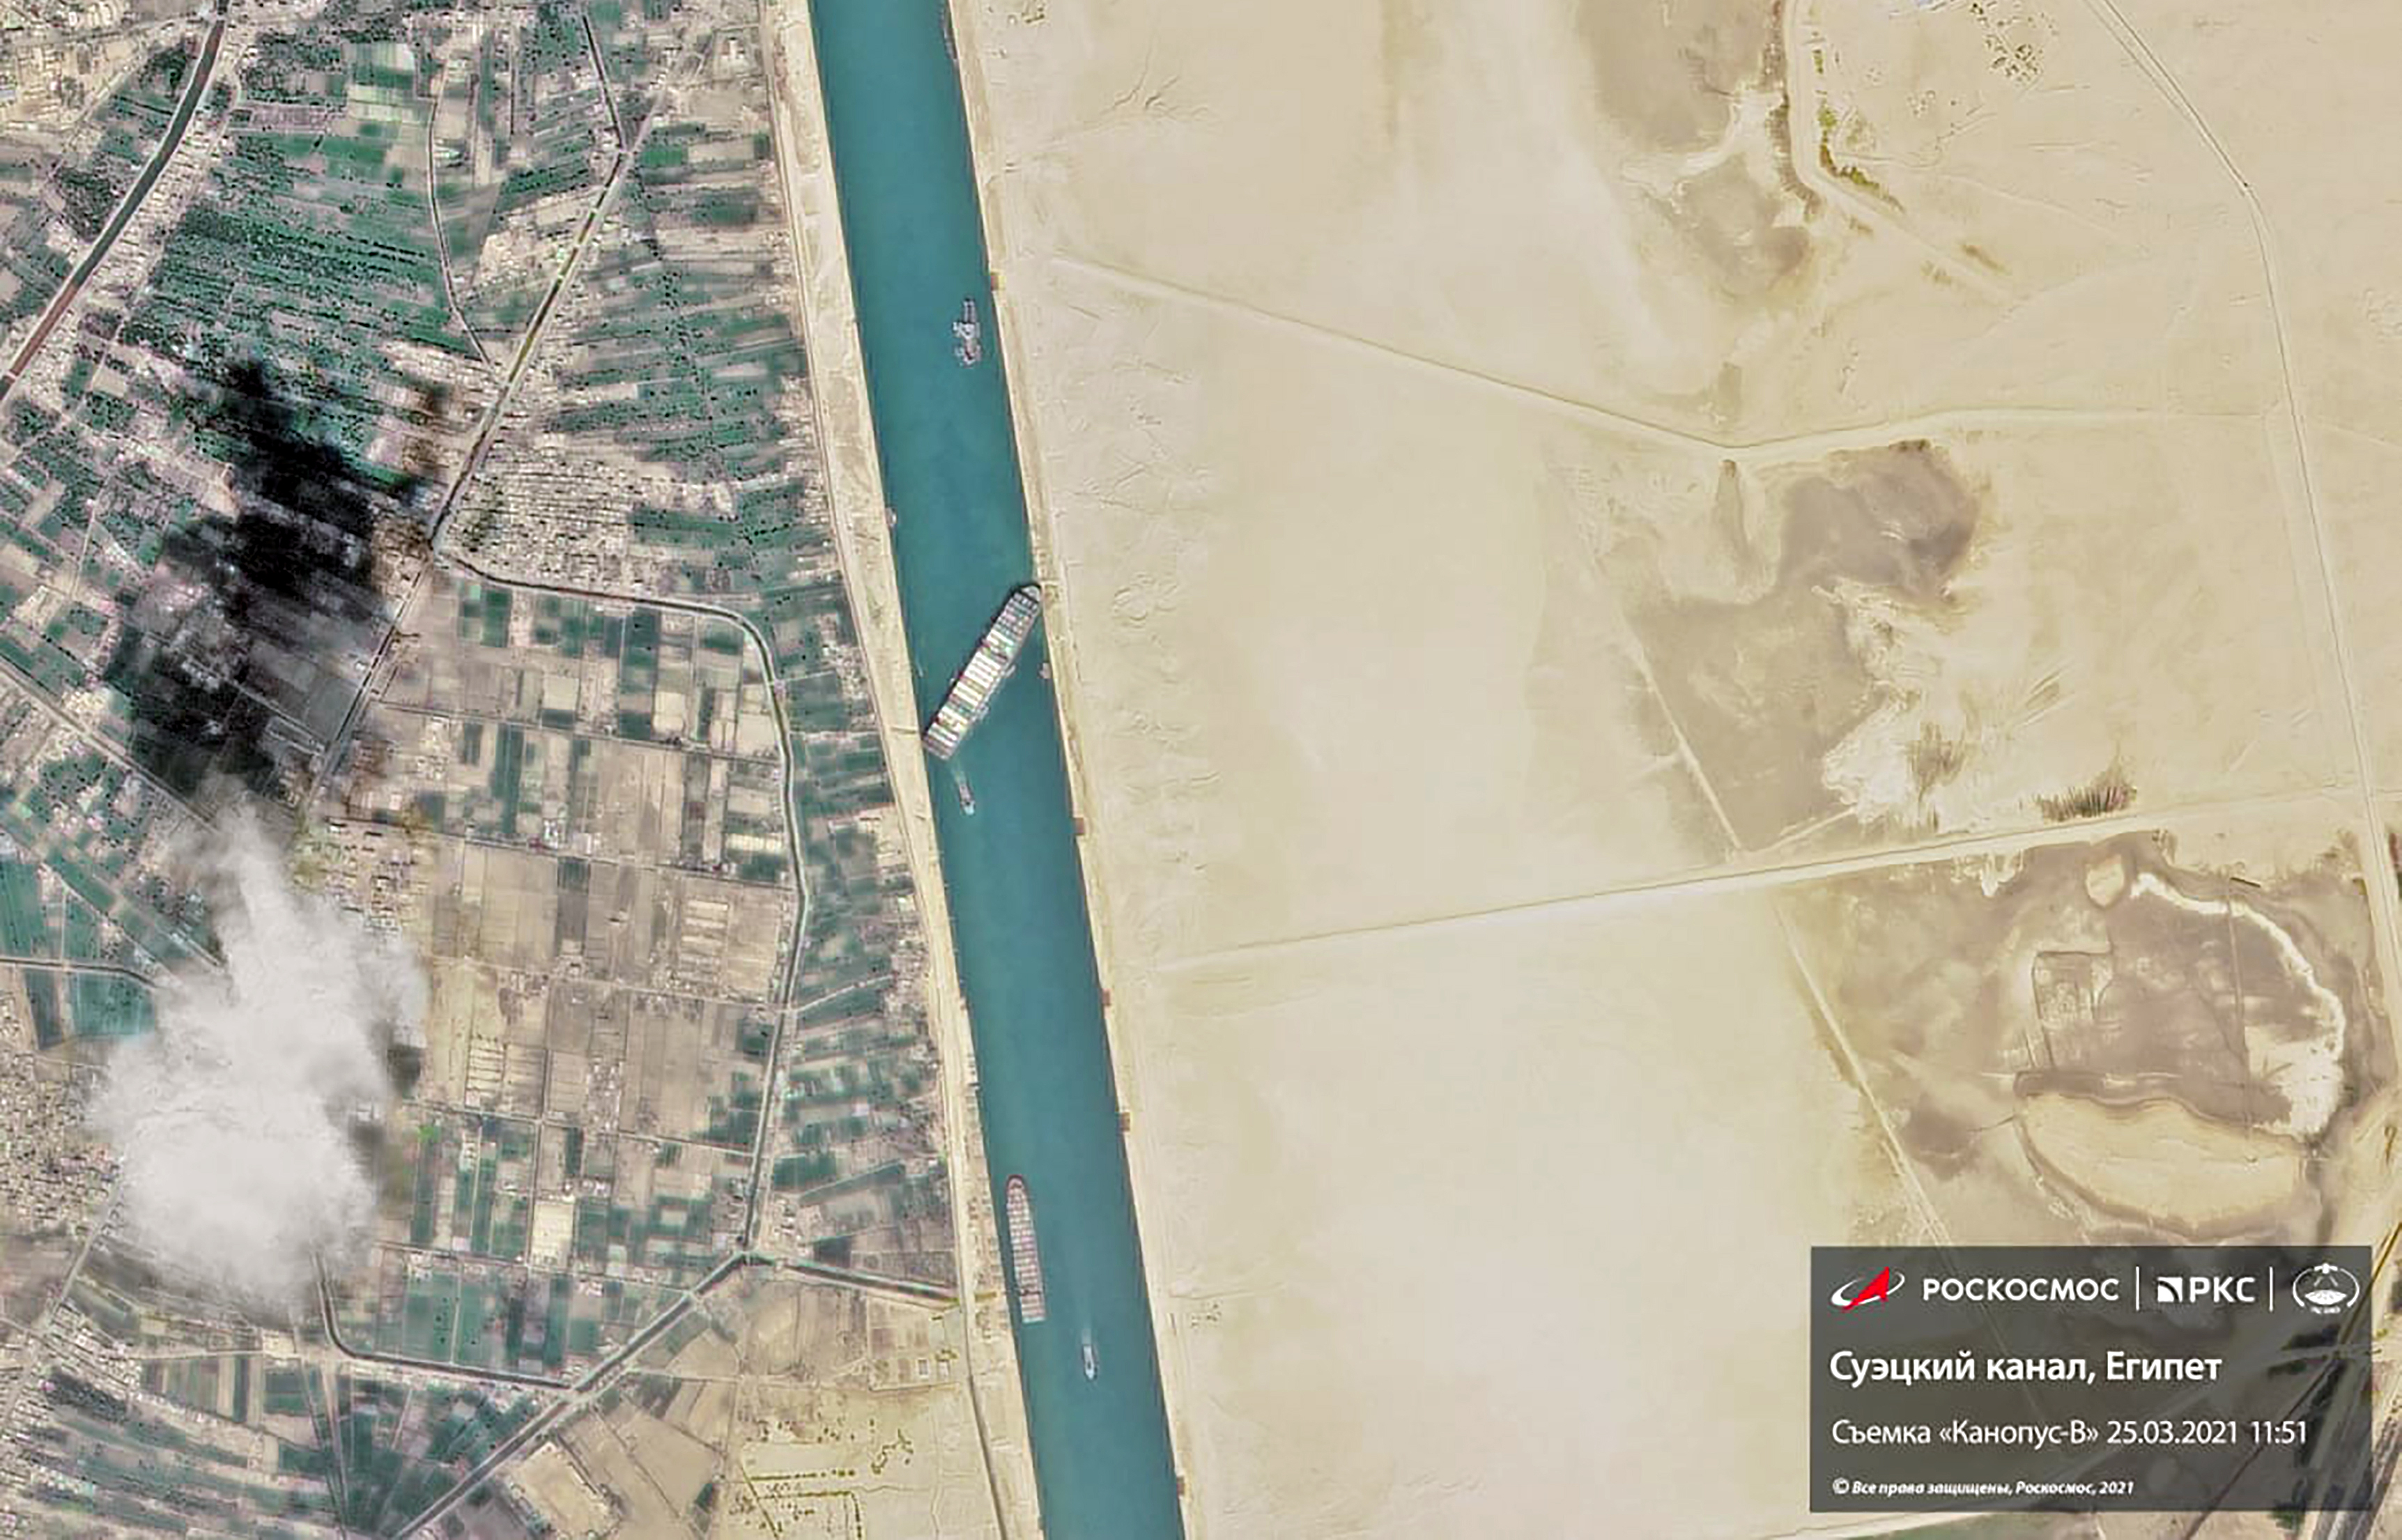 The 400m-long container ship blocked the Suez Canal as it was knocked off course during a sandstorm while en route from China to Rotterdam, Netherlands photo.